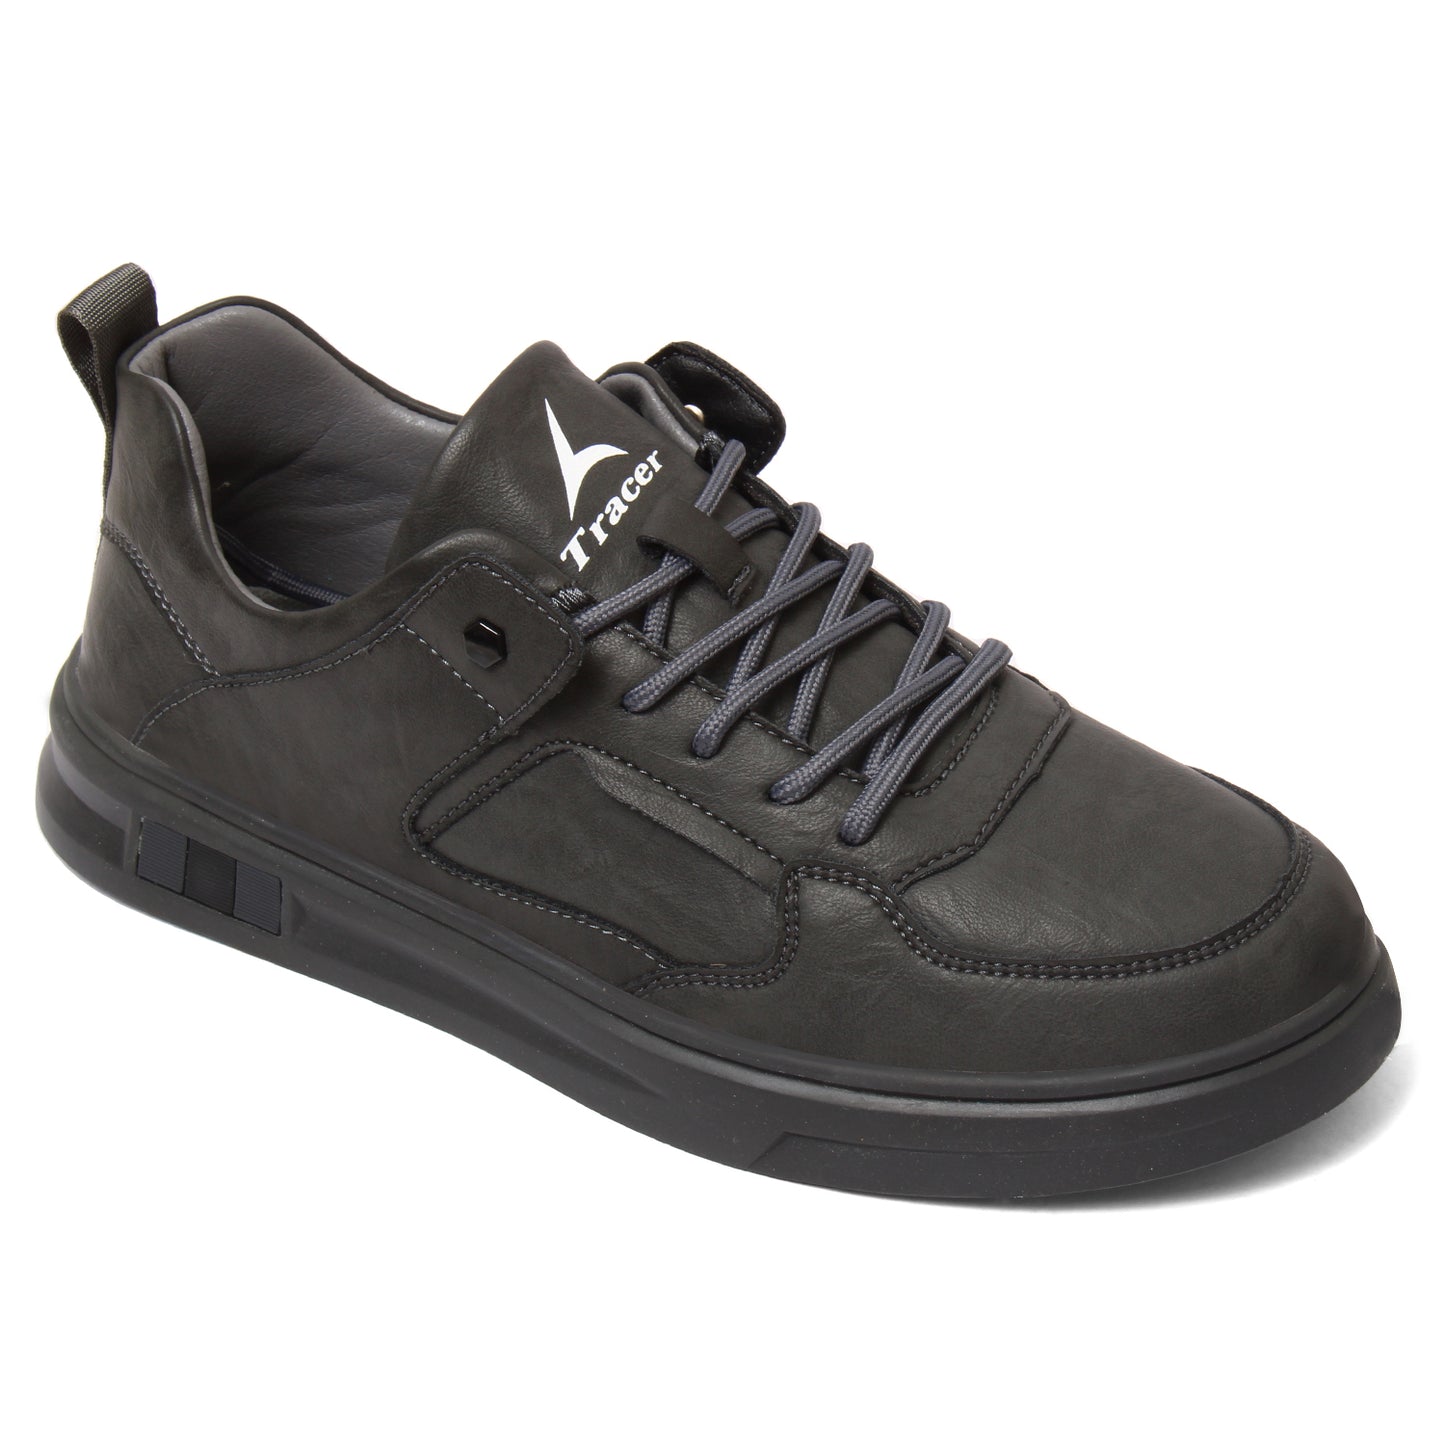 Tracer India Scoosh 2712 Sneaker D Grey